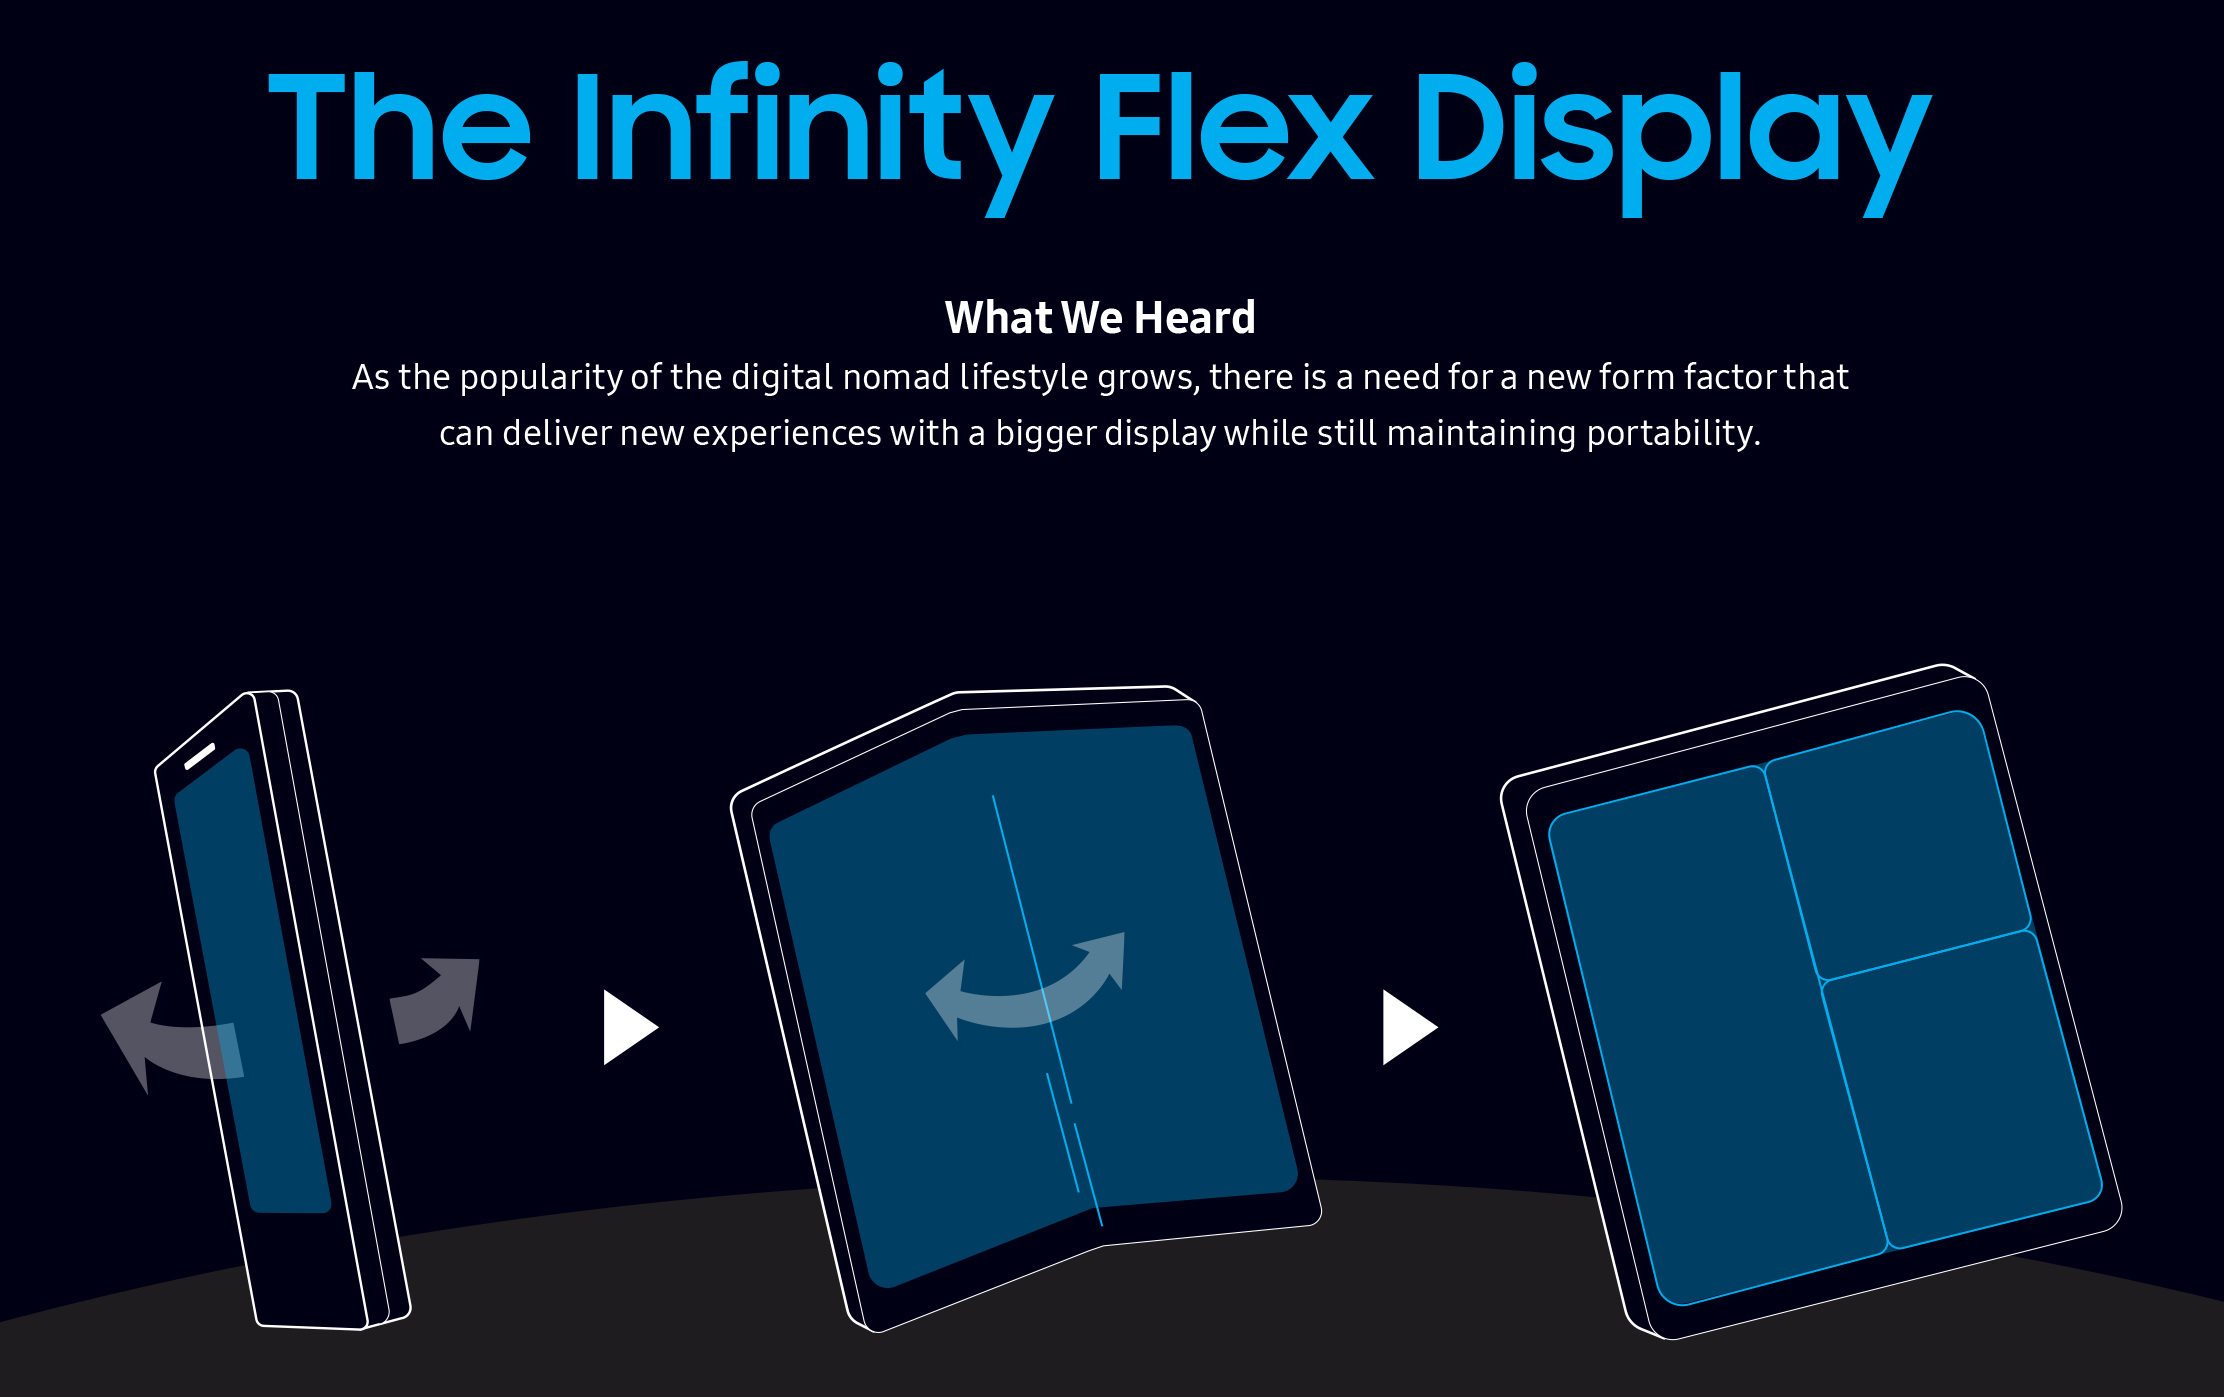 Samsung announces Infinity Flex Display for foldable smartphones